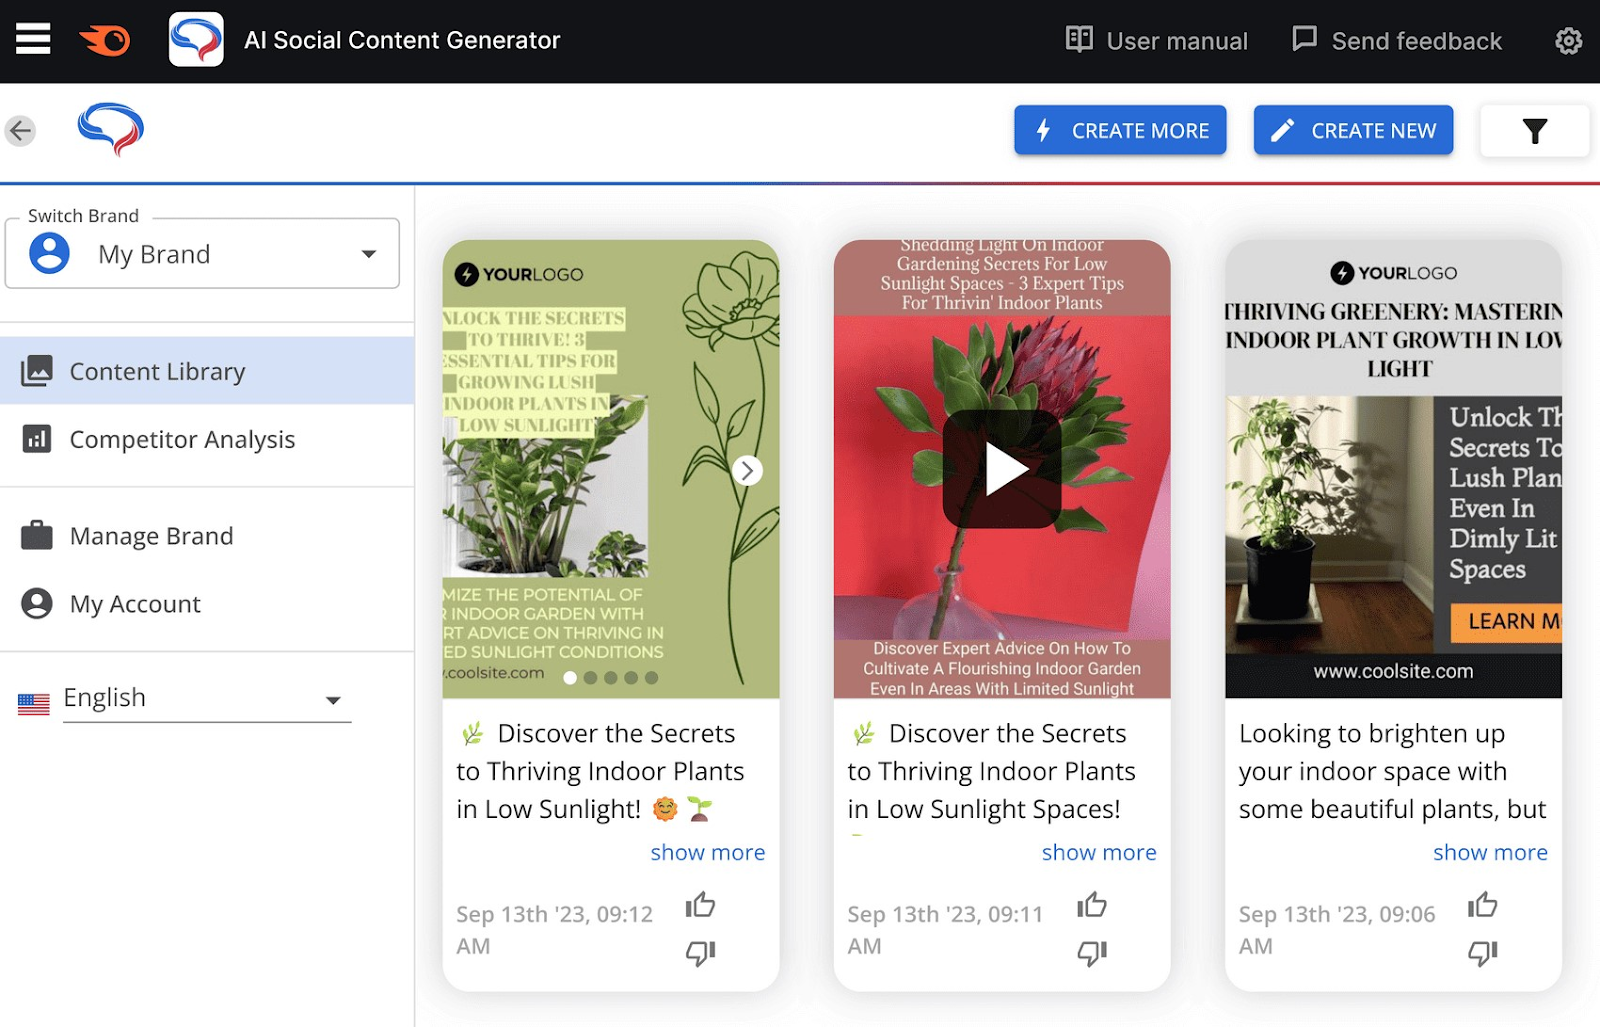 "Content Library" in AI Social Content Generator